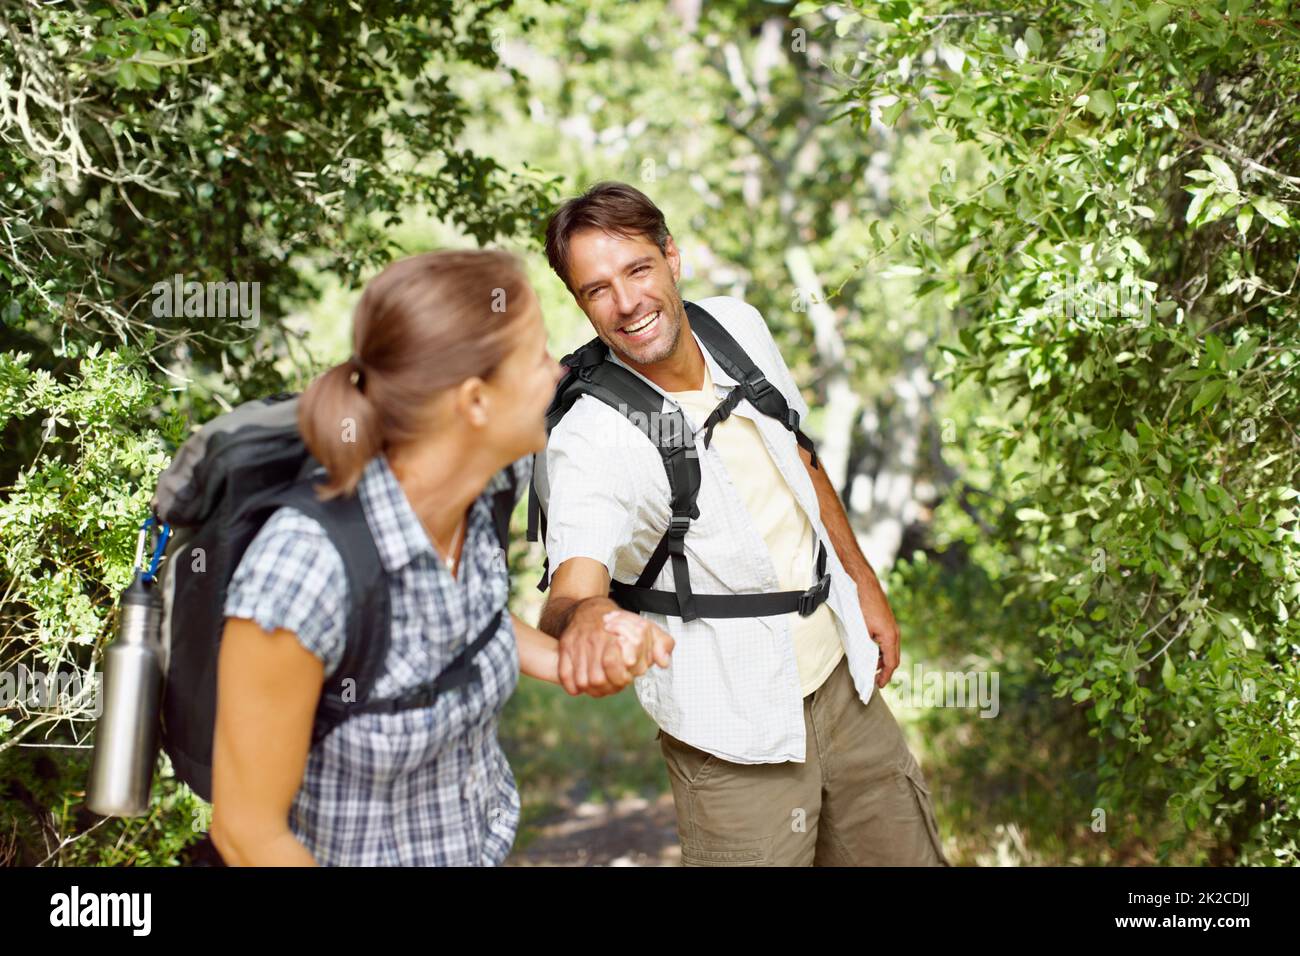 Motivating each other to keep moving. A young man being pulled playfully by his wife with backpacks on their backs. Stock Photo